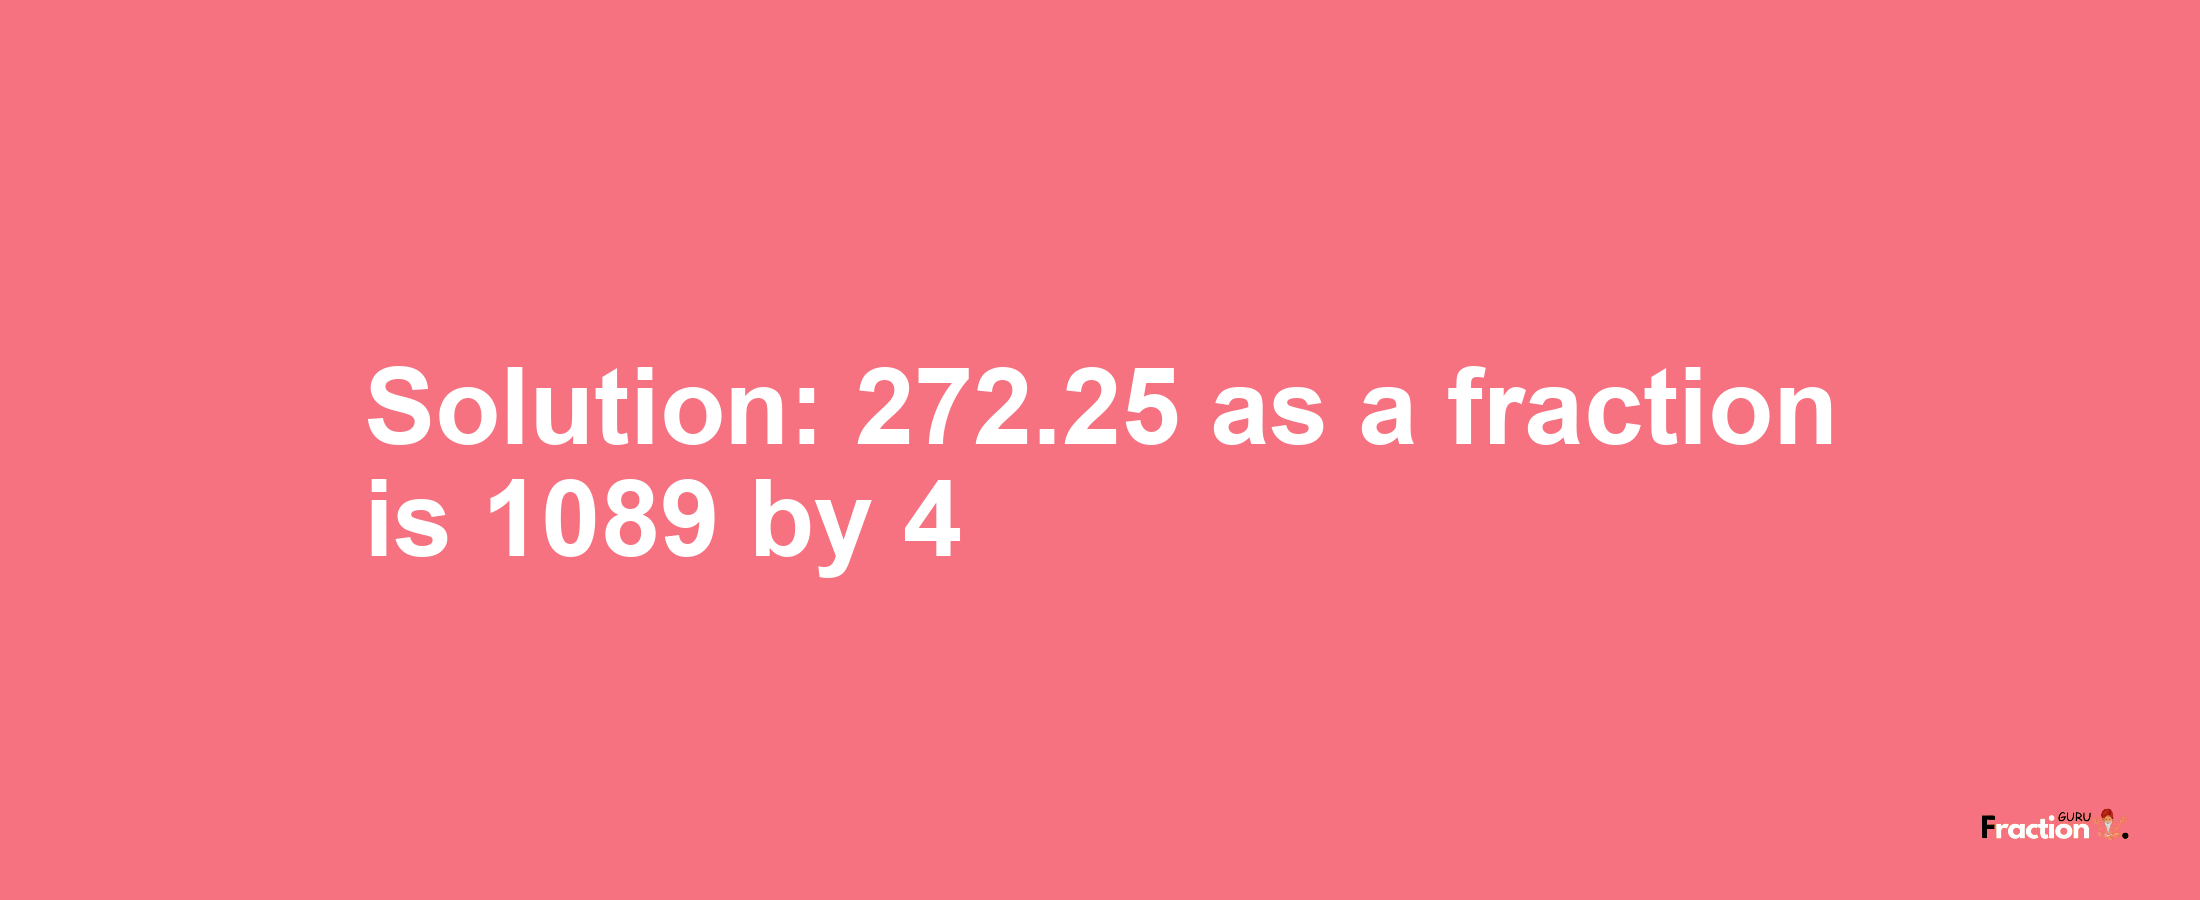 Solution:272.25 as a fraction is 1089/4